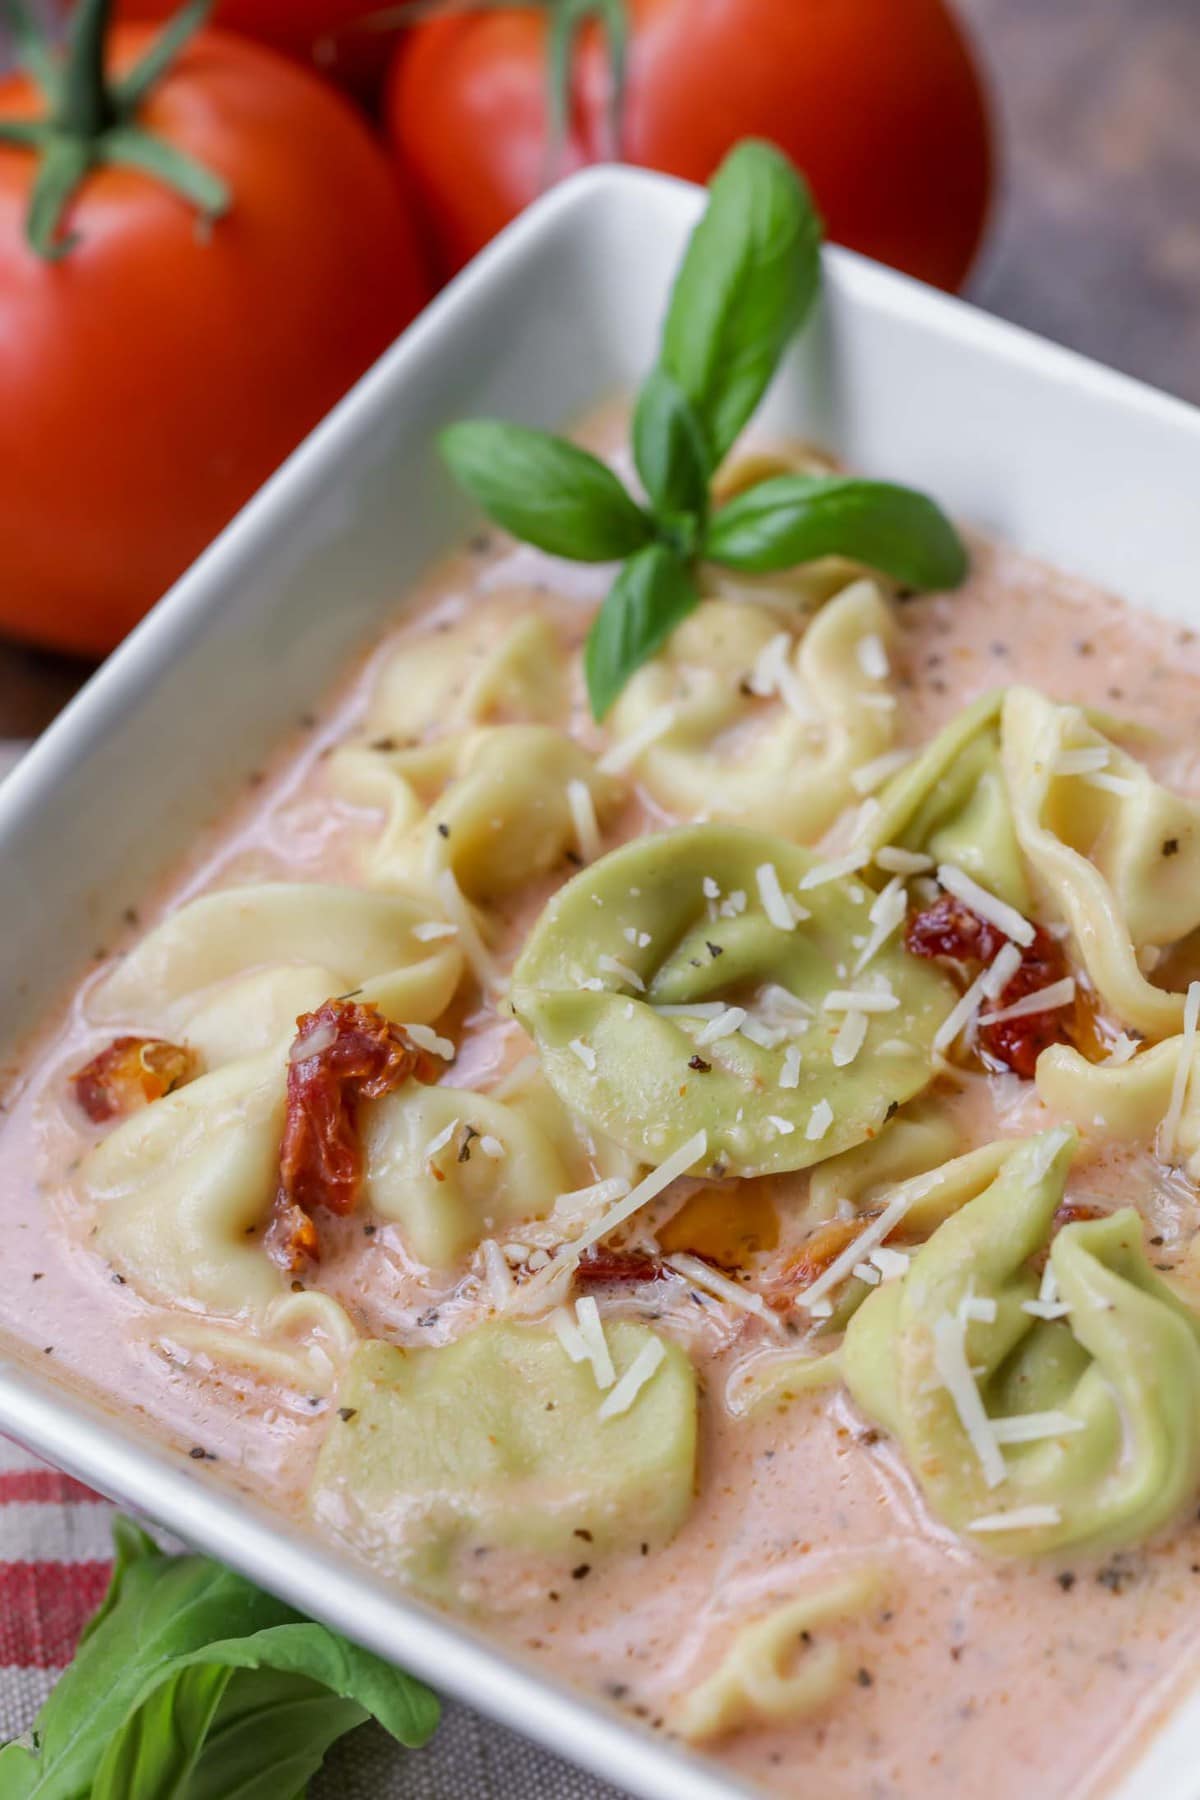 Italian Soups - Tomato tortellini soup served with fresh herbs and grated parmesan.